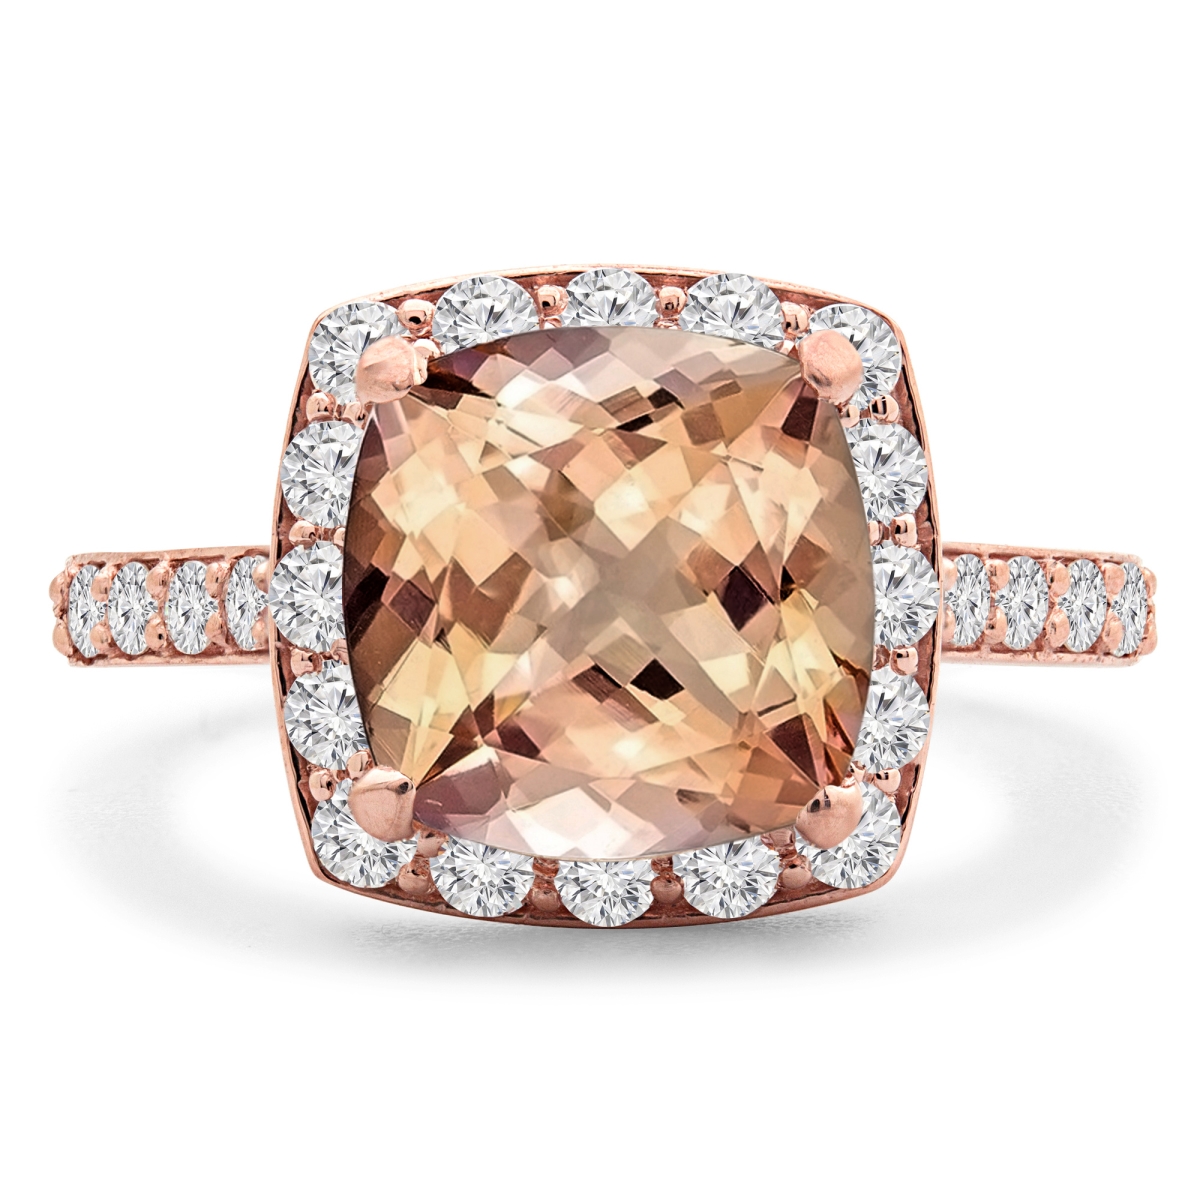 MD190569-7.25 3.67 CTW Cushion Pink Morganite Cushion Halo Engagement Ring in 14K Rose Gold - Size 7.25